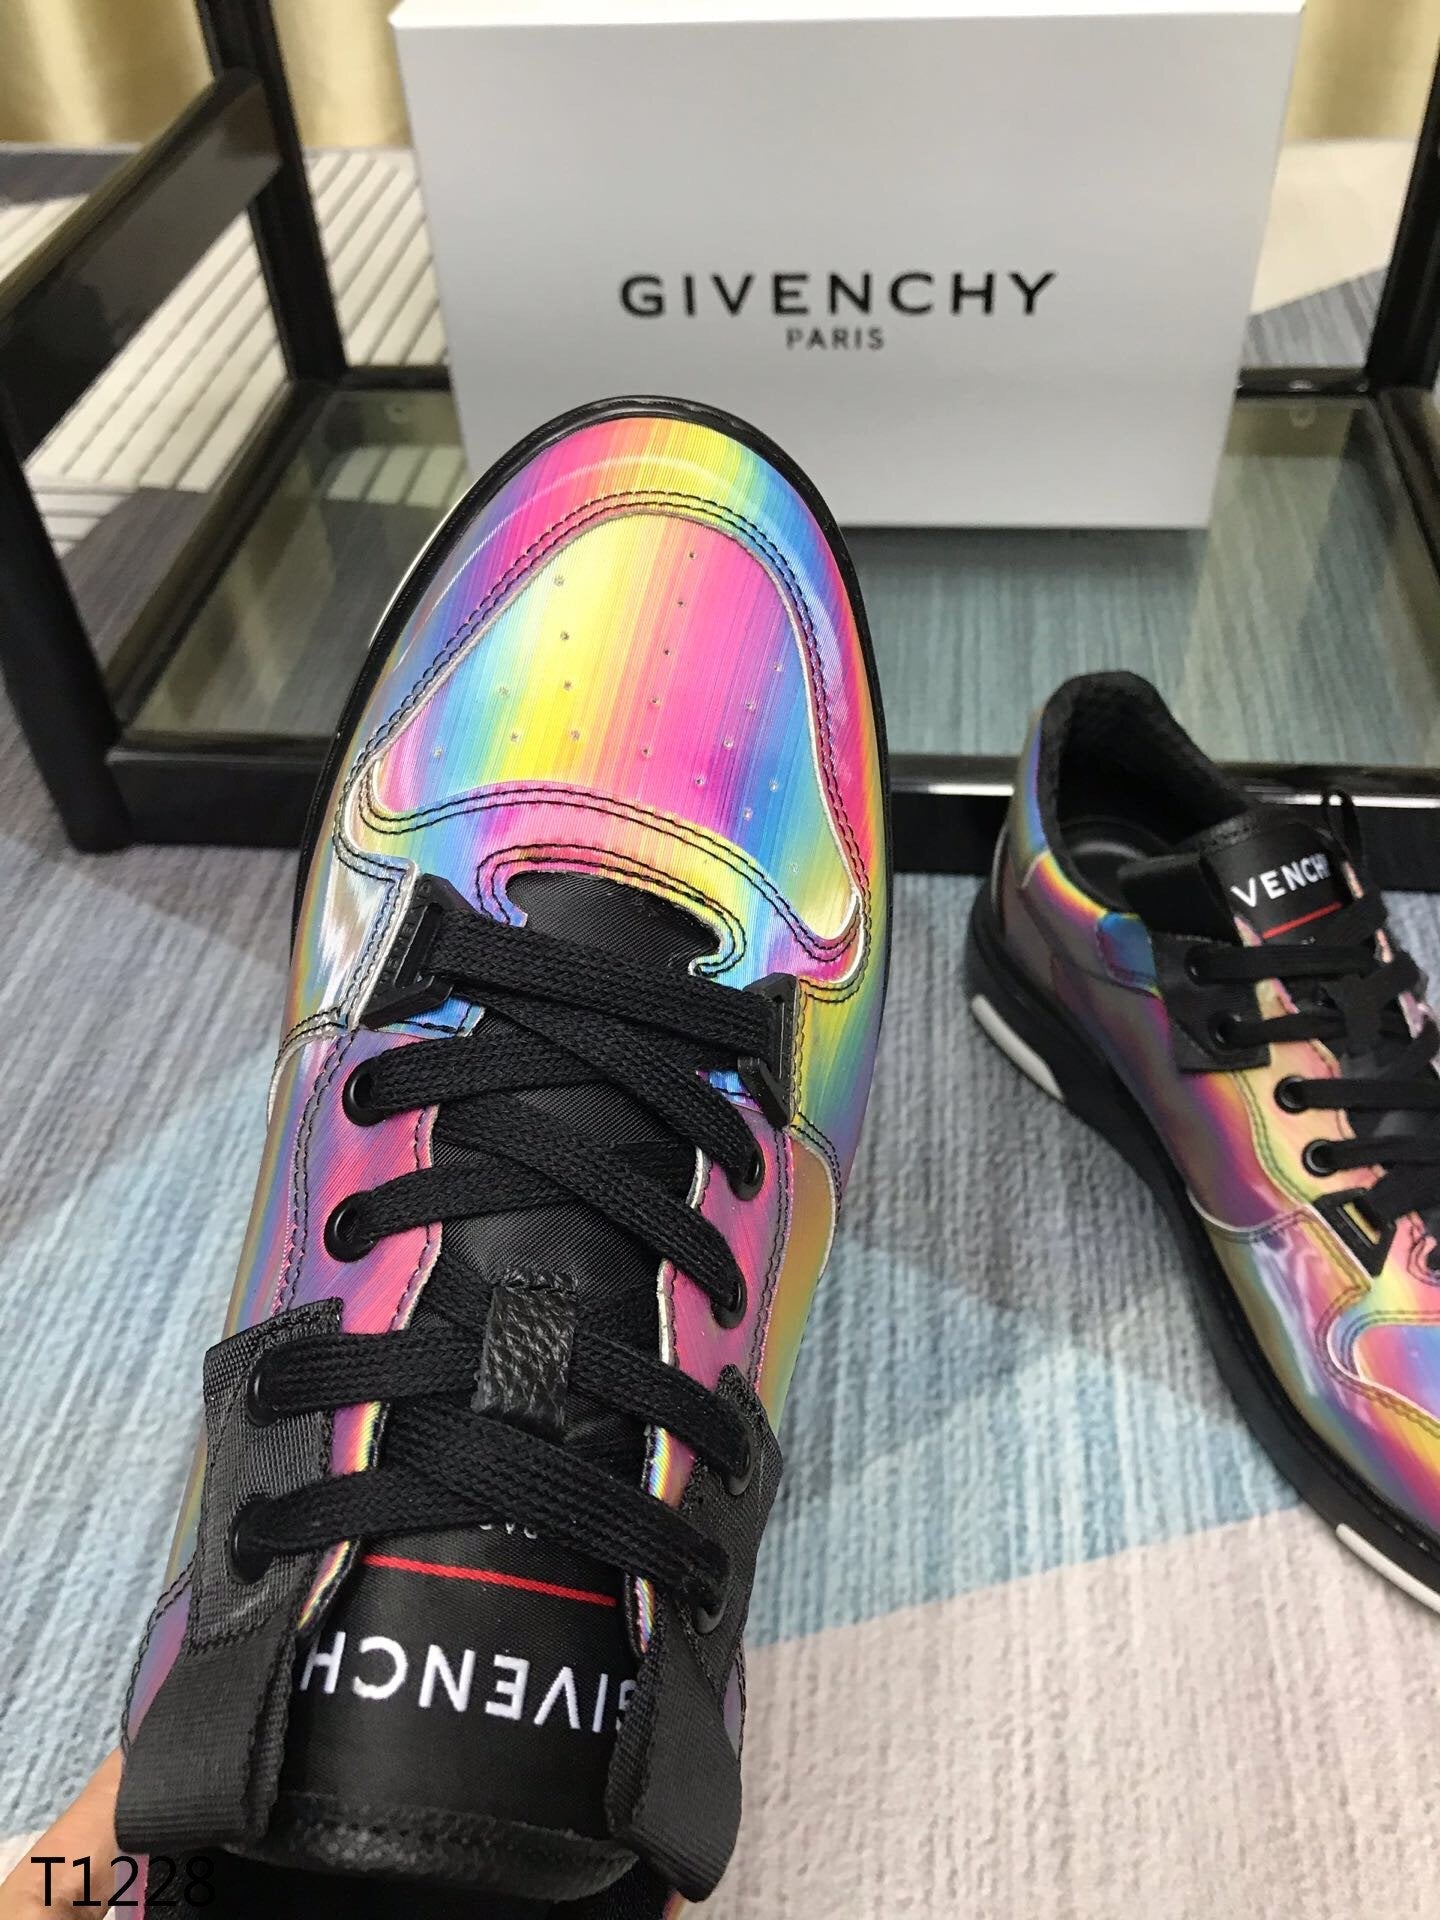 Givenjy Sneakers Multi